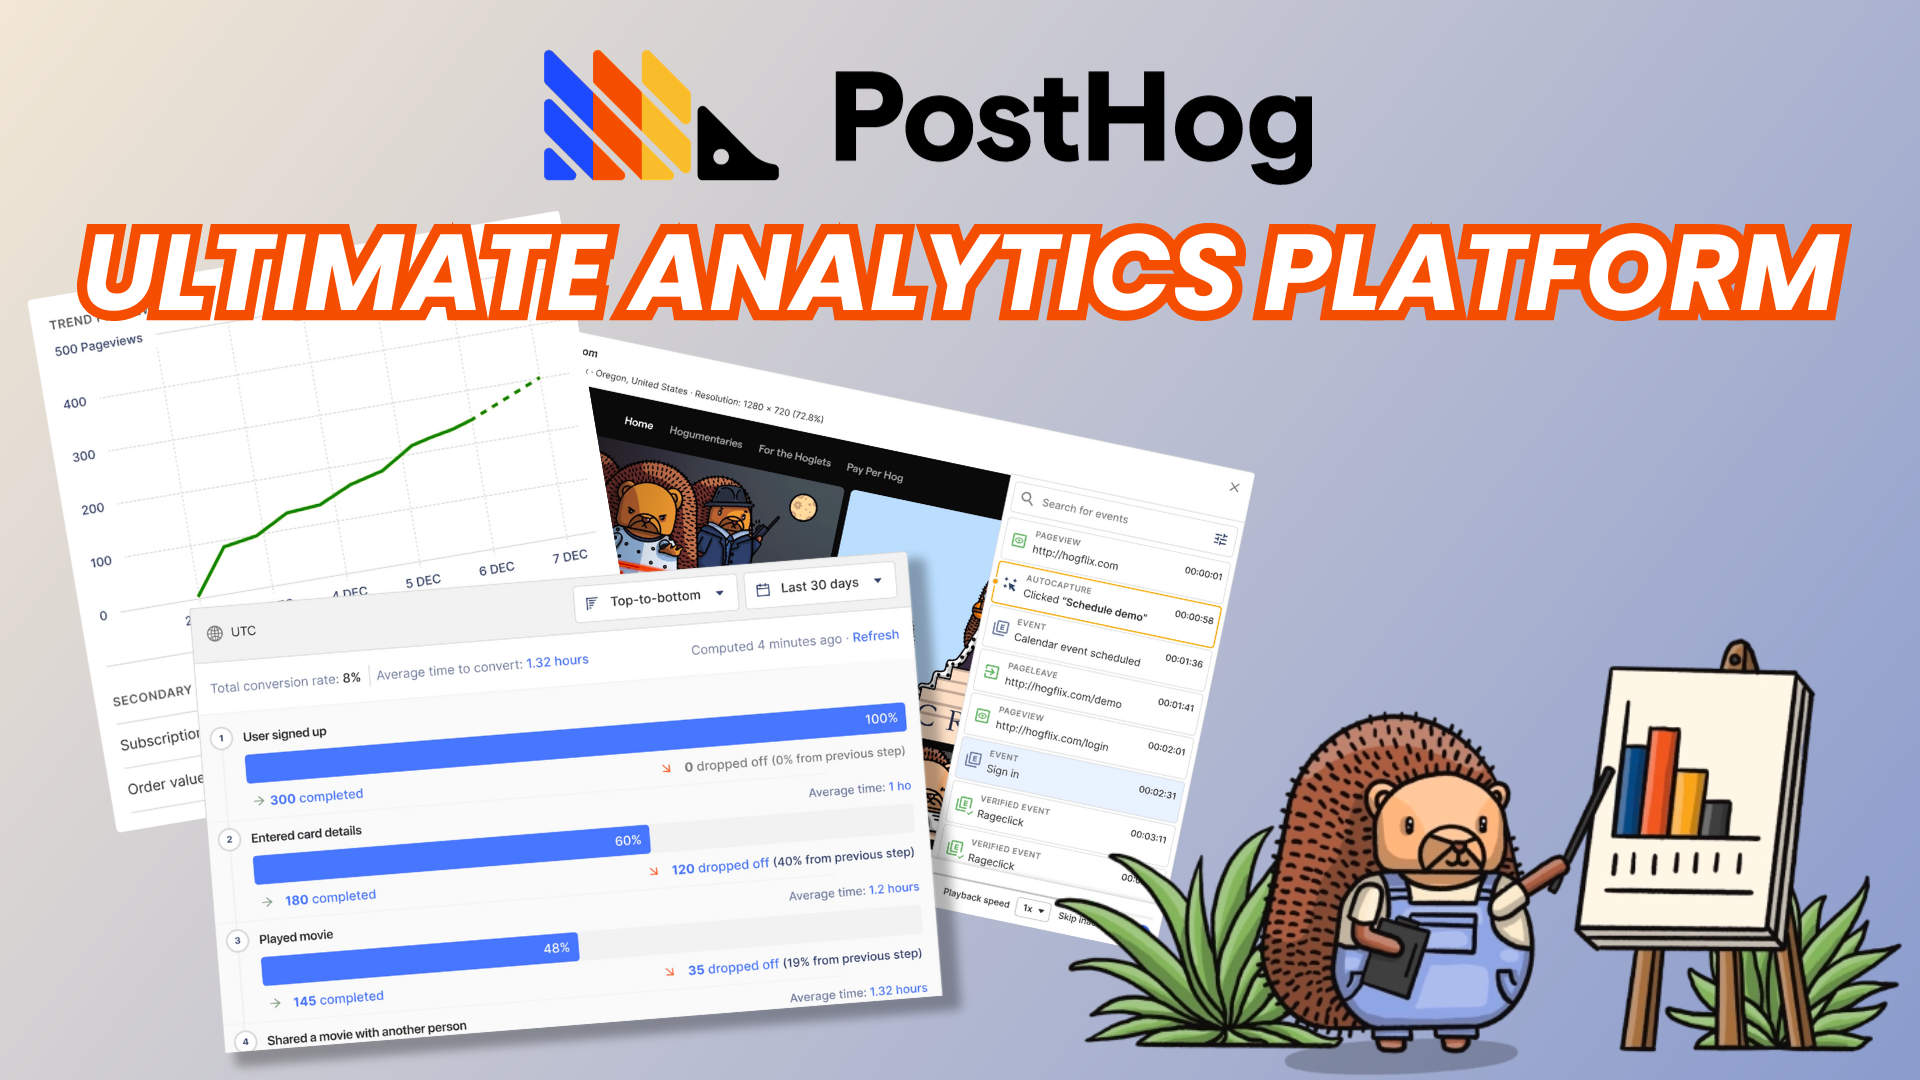 Posthog: The ultimate Open Source Product Analytics Platform